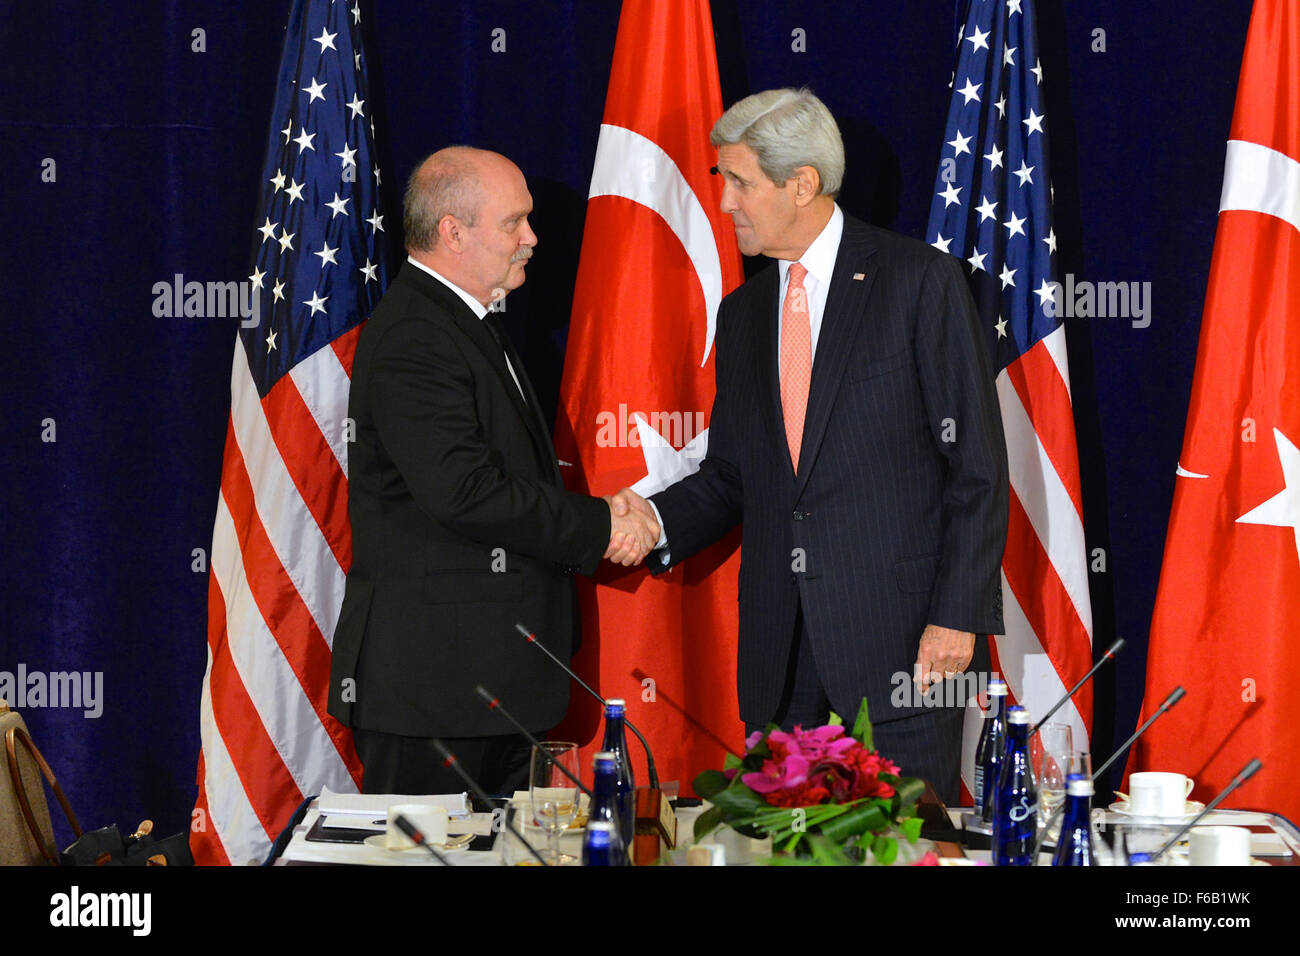 Secretary Kerry Shakes Hands With Turkish Foreign Minister Sinirlioglu Before Their Meeting in New York City Stock Photo